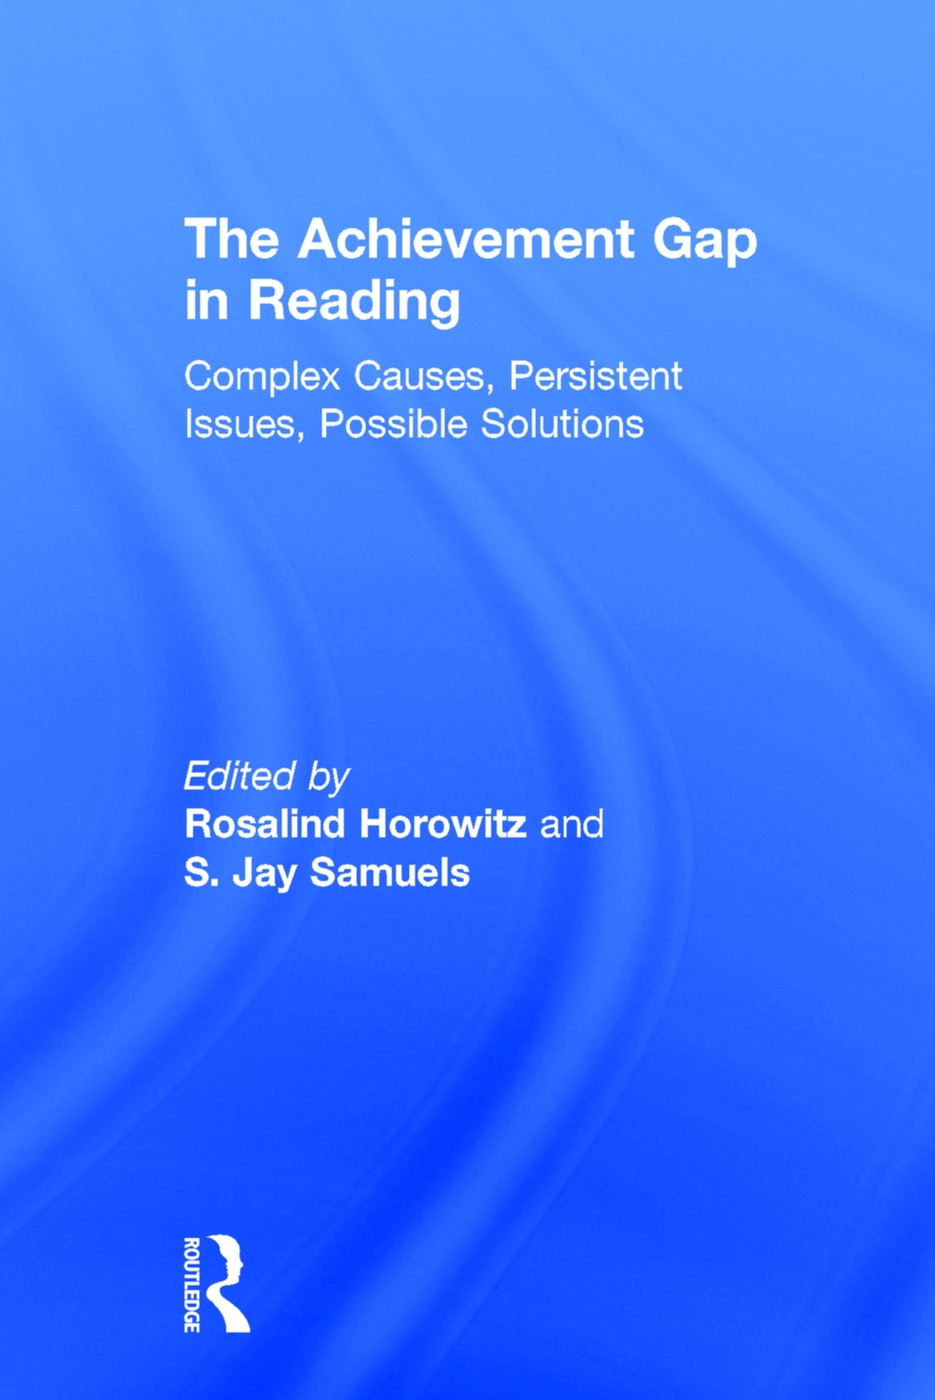 The Achievement Gap in Reading: Complex Causes, Persistent Issues, Possible Solutions